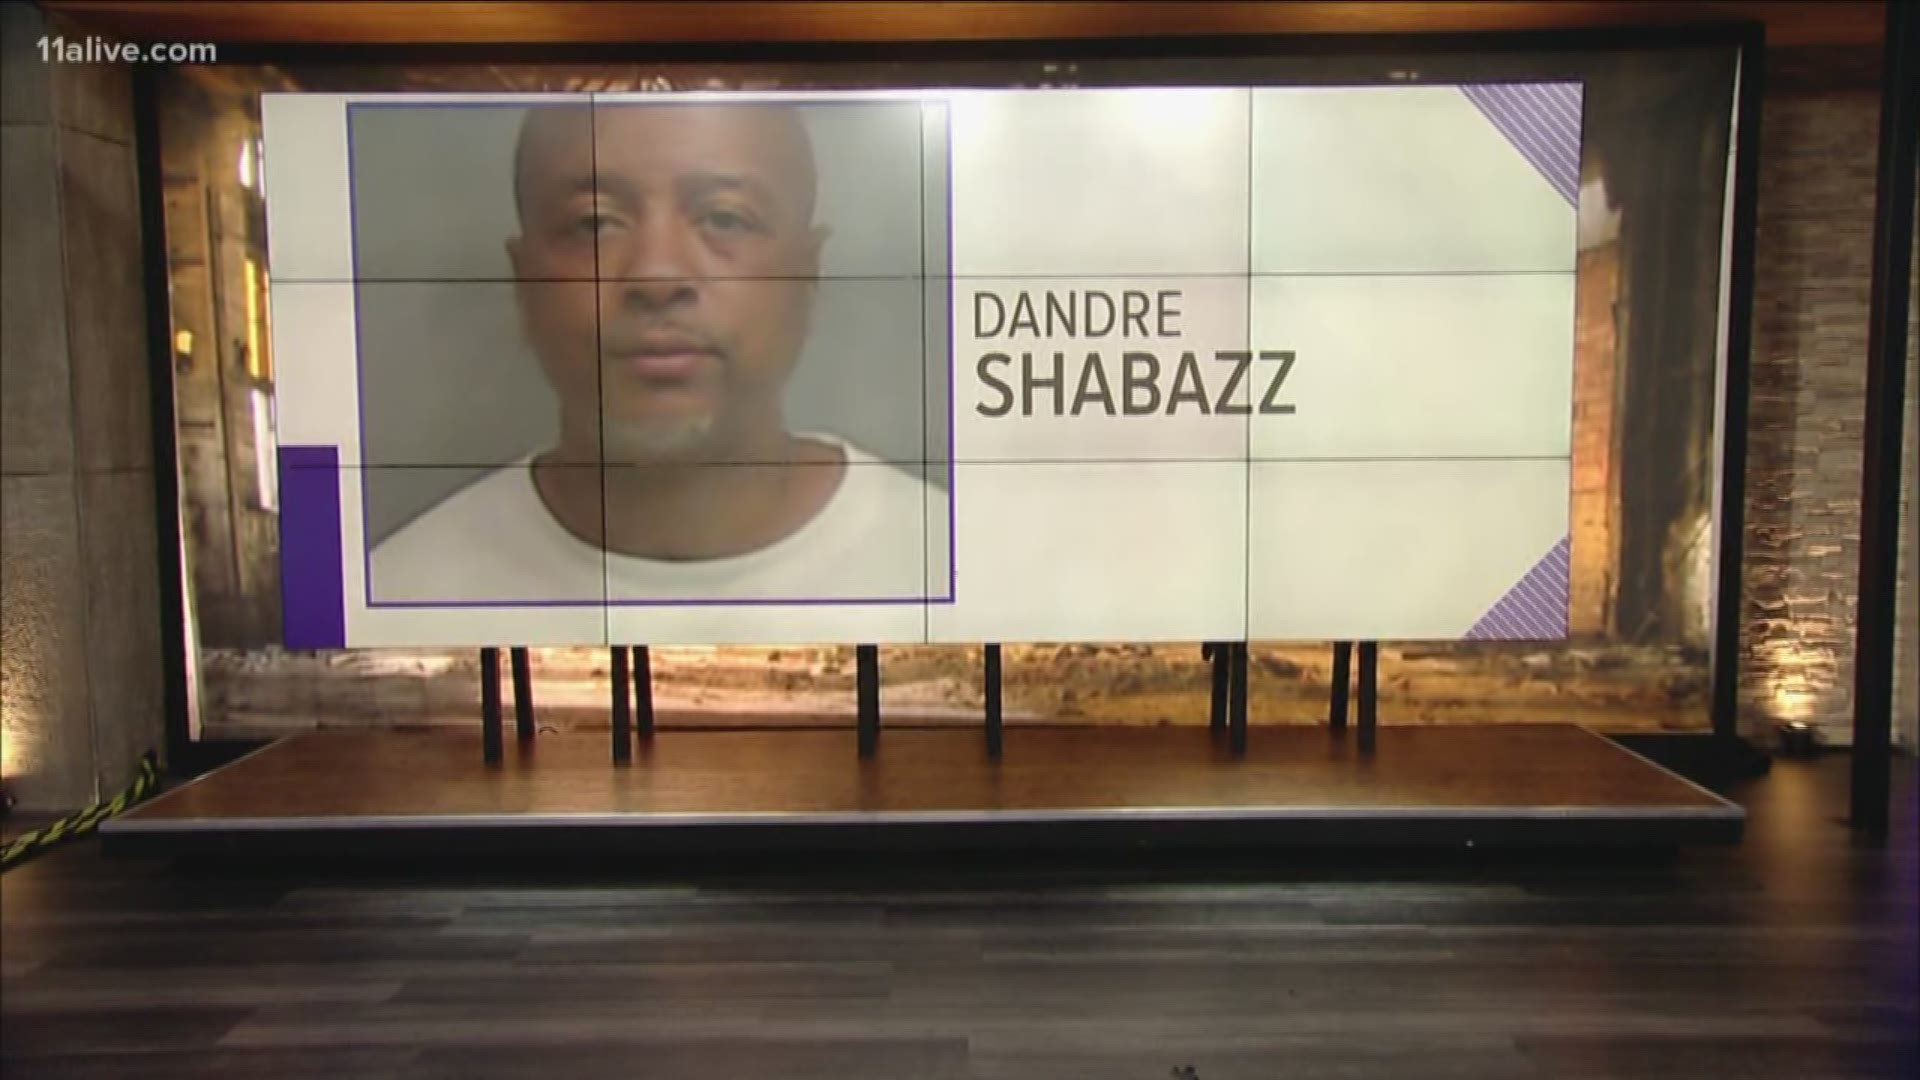 D'Andre Shabazz is on trial.